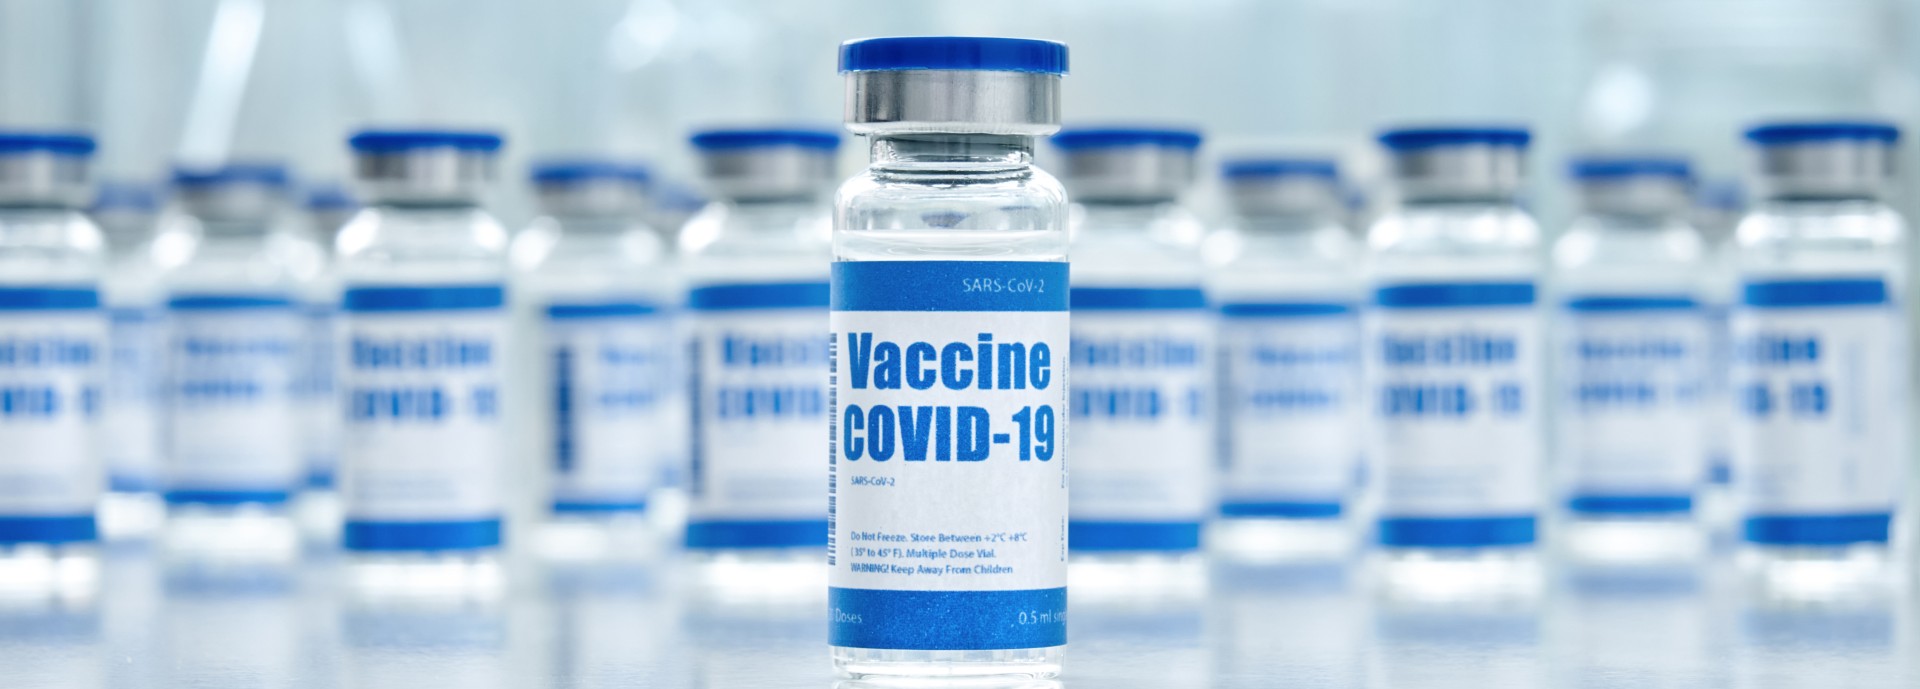 Vials of clear liquid marked with COVID-19 vaccine labels